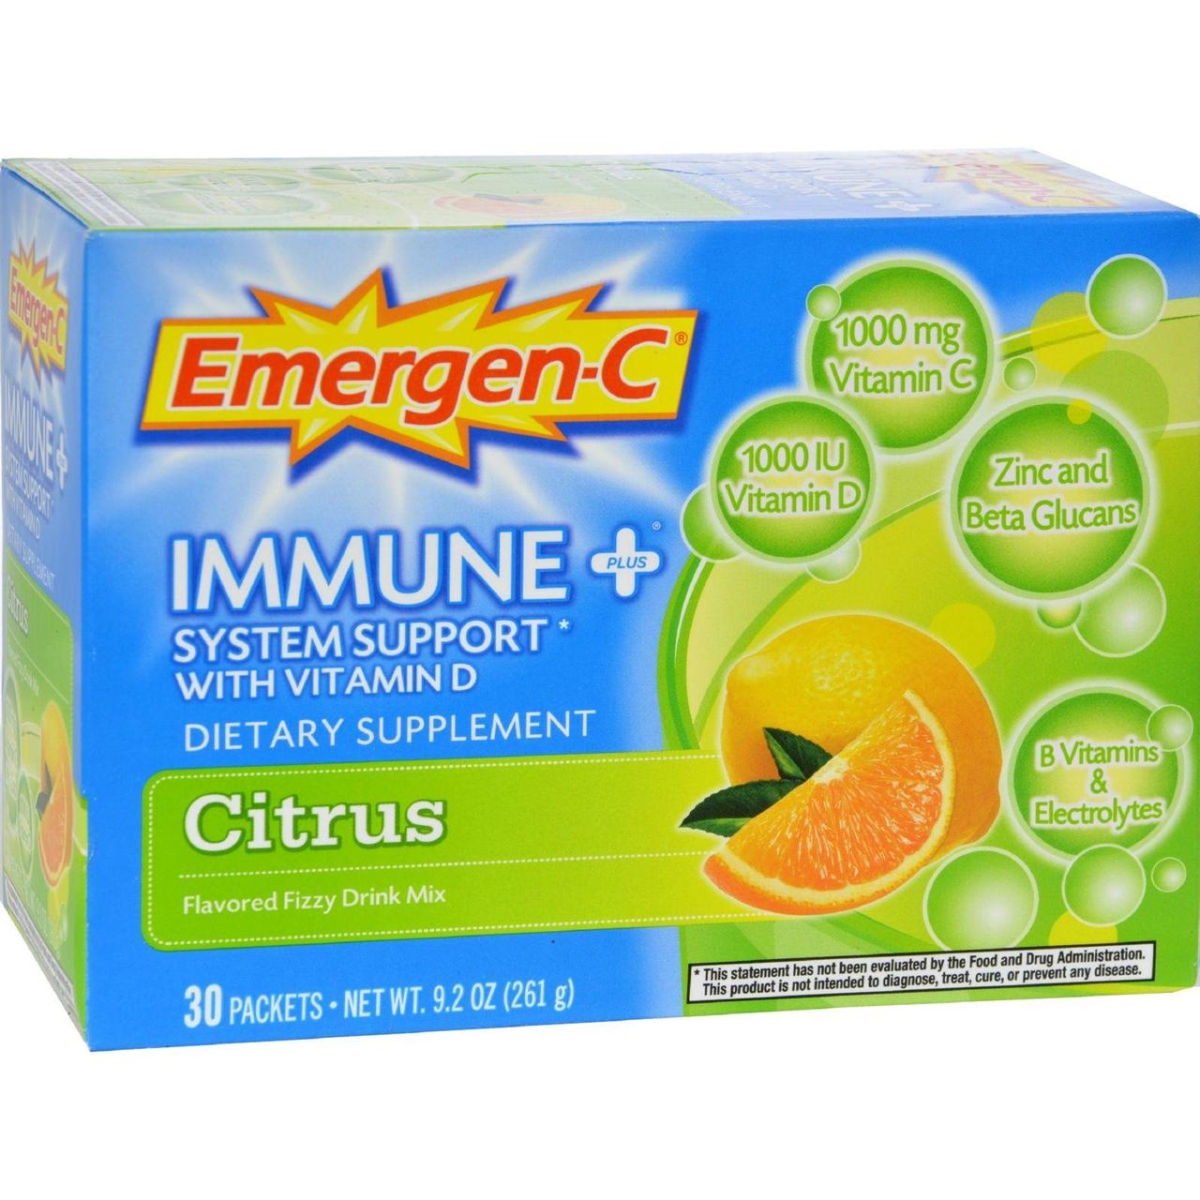 Alacer Hg0760520 Emergen-c Immune Plus System Support With Vitamin D Citrus, 30 Packet